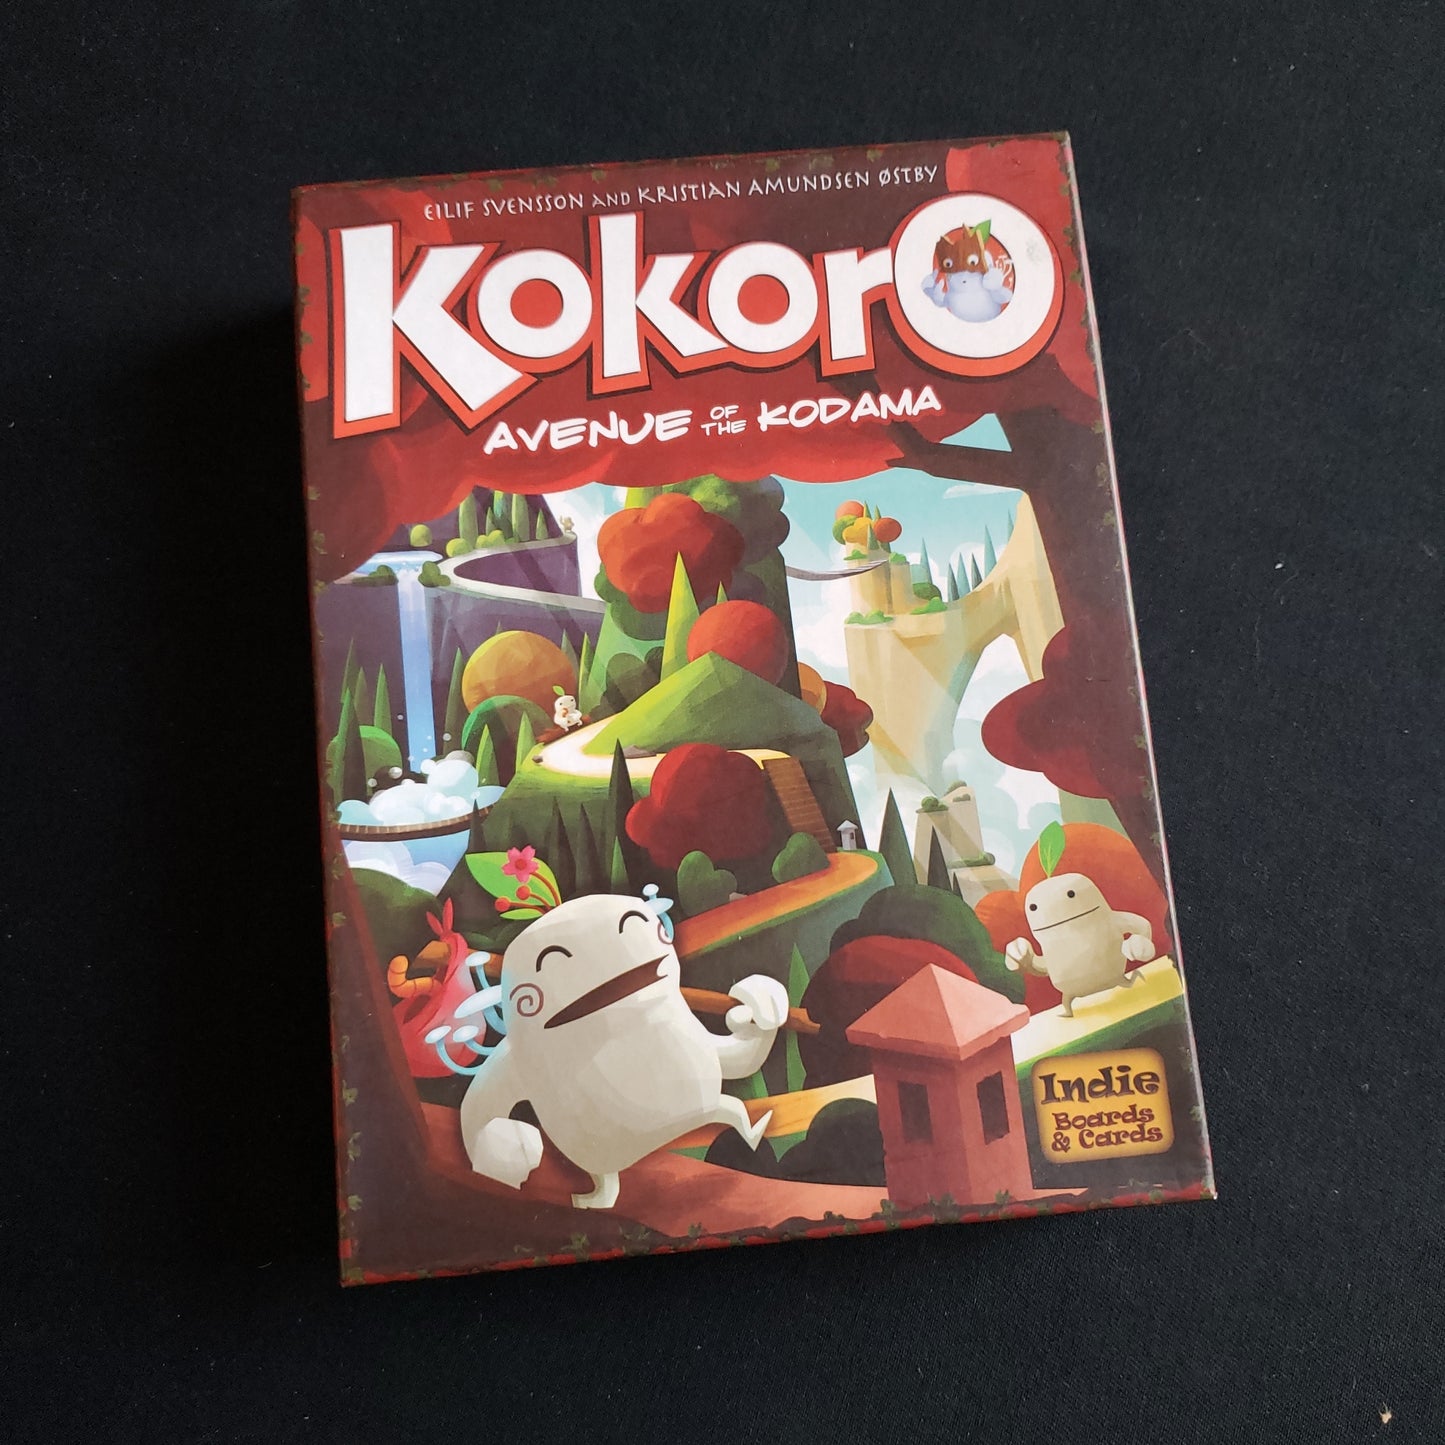 Image shows the front cover of the box of the Kokoro: Avenue of the Kodama board game